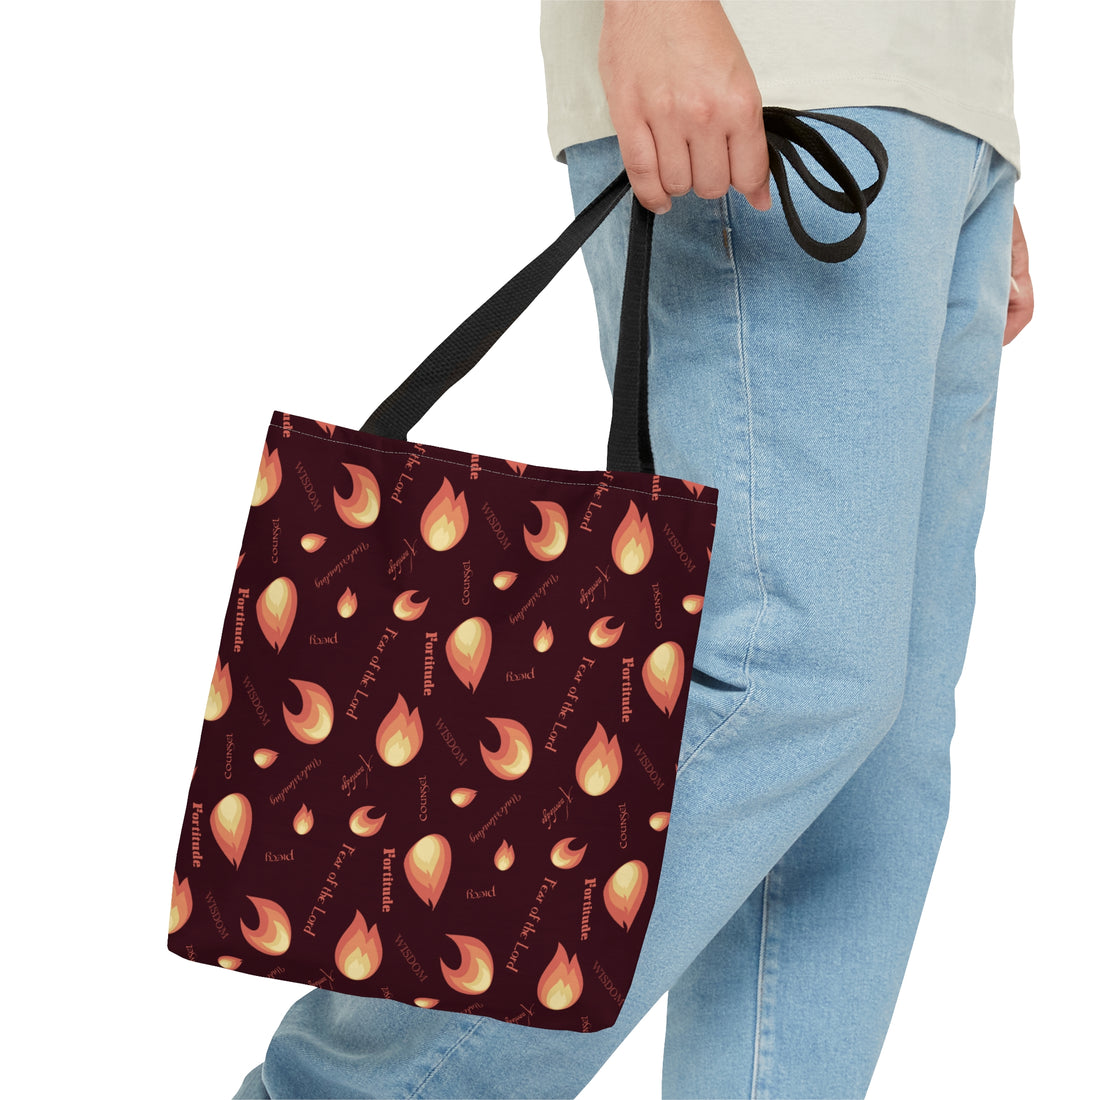 Gifts of the Holy Spirit Tote Bag in Dark Maroon